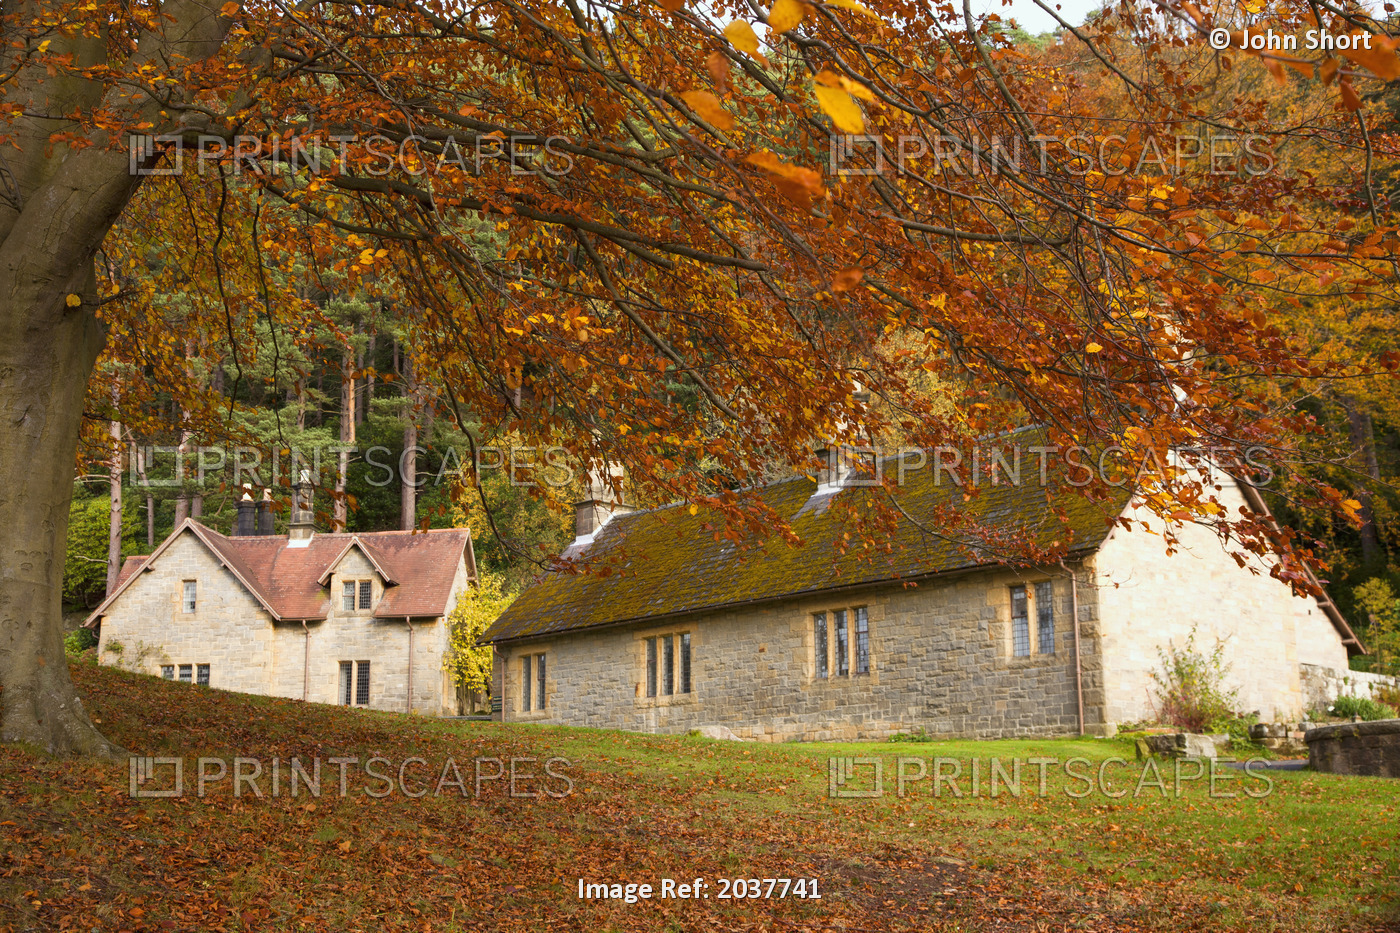 Houses With Trees In Autumn Colours; Northumberland England